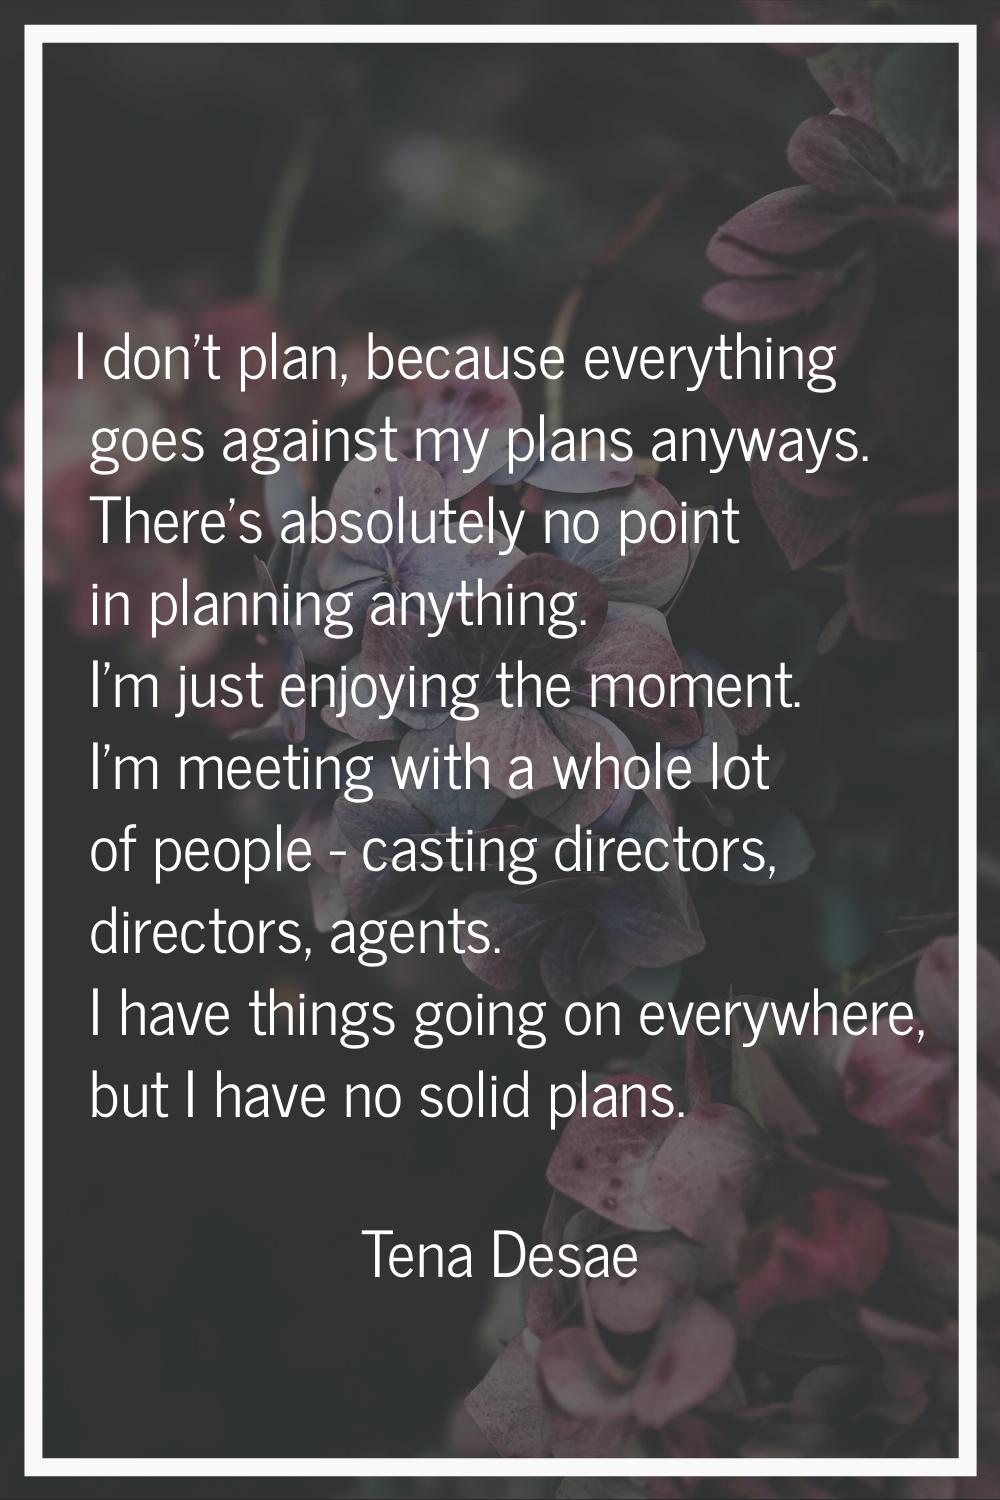 I don't plan, because everything goes against my plans anyways. There's absolutely no point in plan